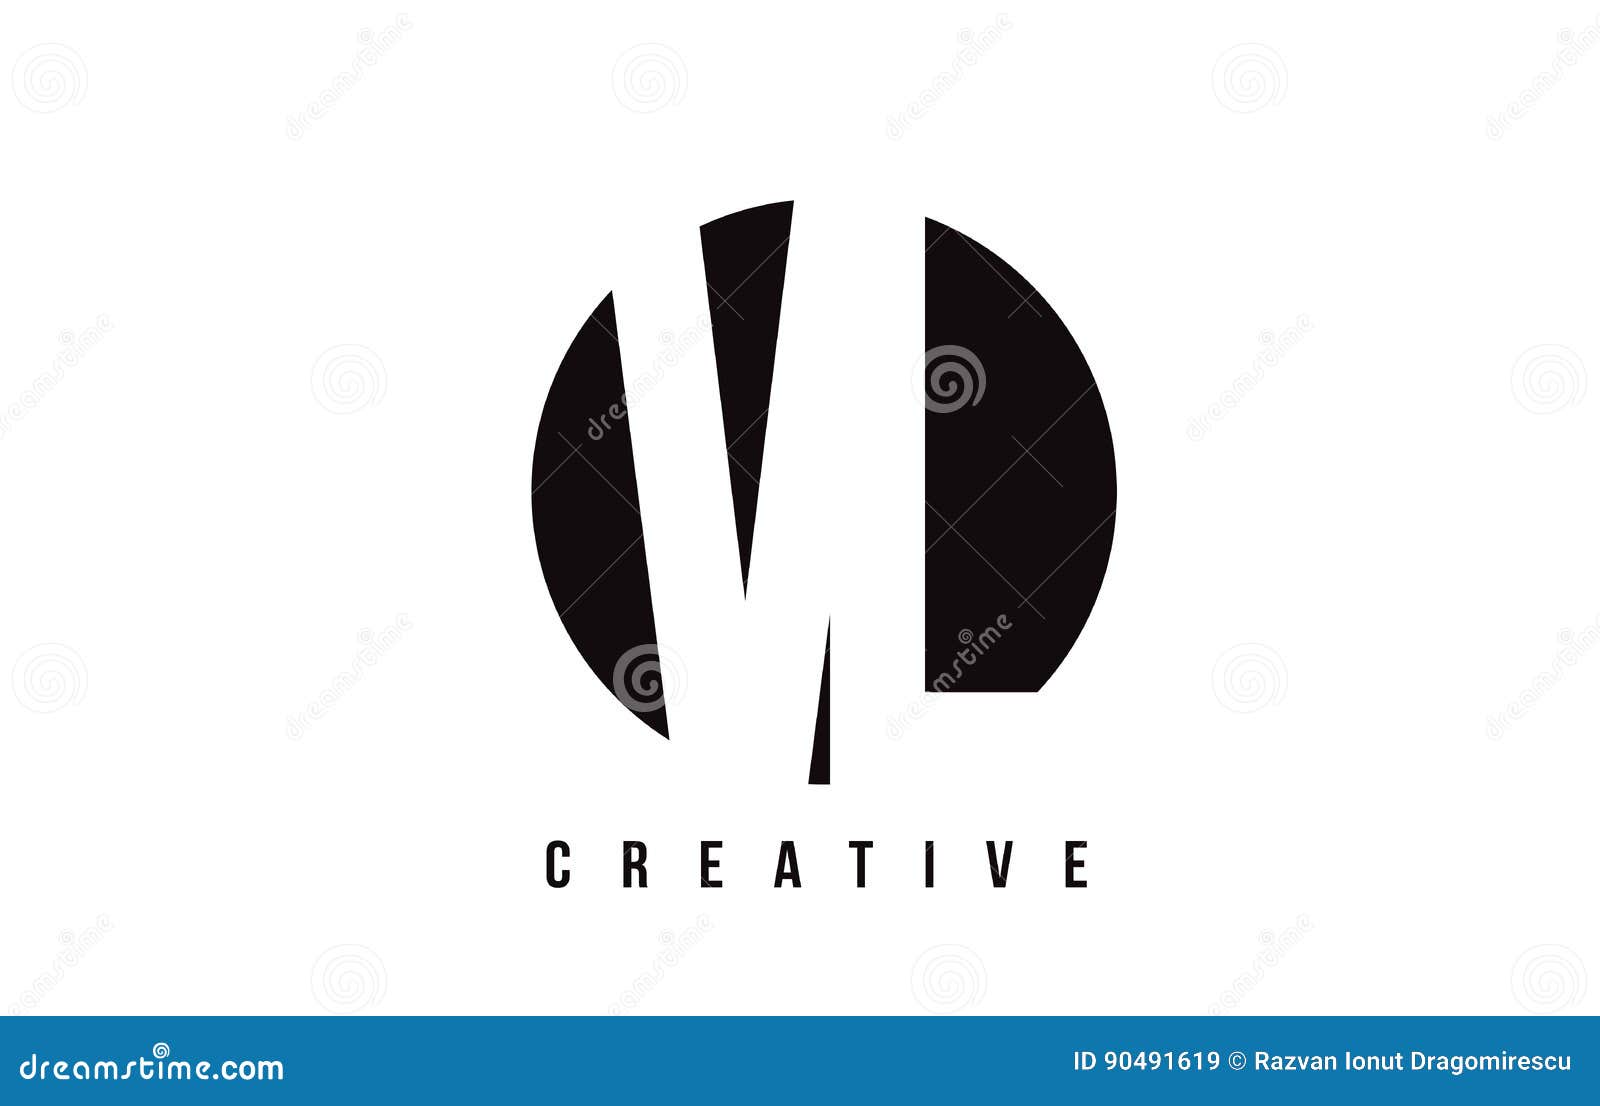 Vl v l black and yellow letter logo with swoosh Vector Image